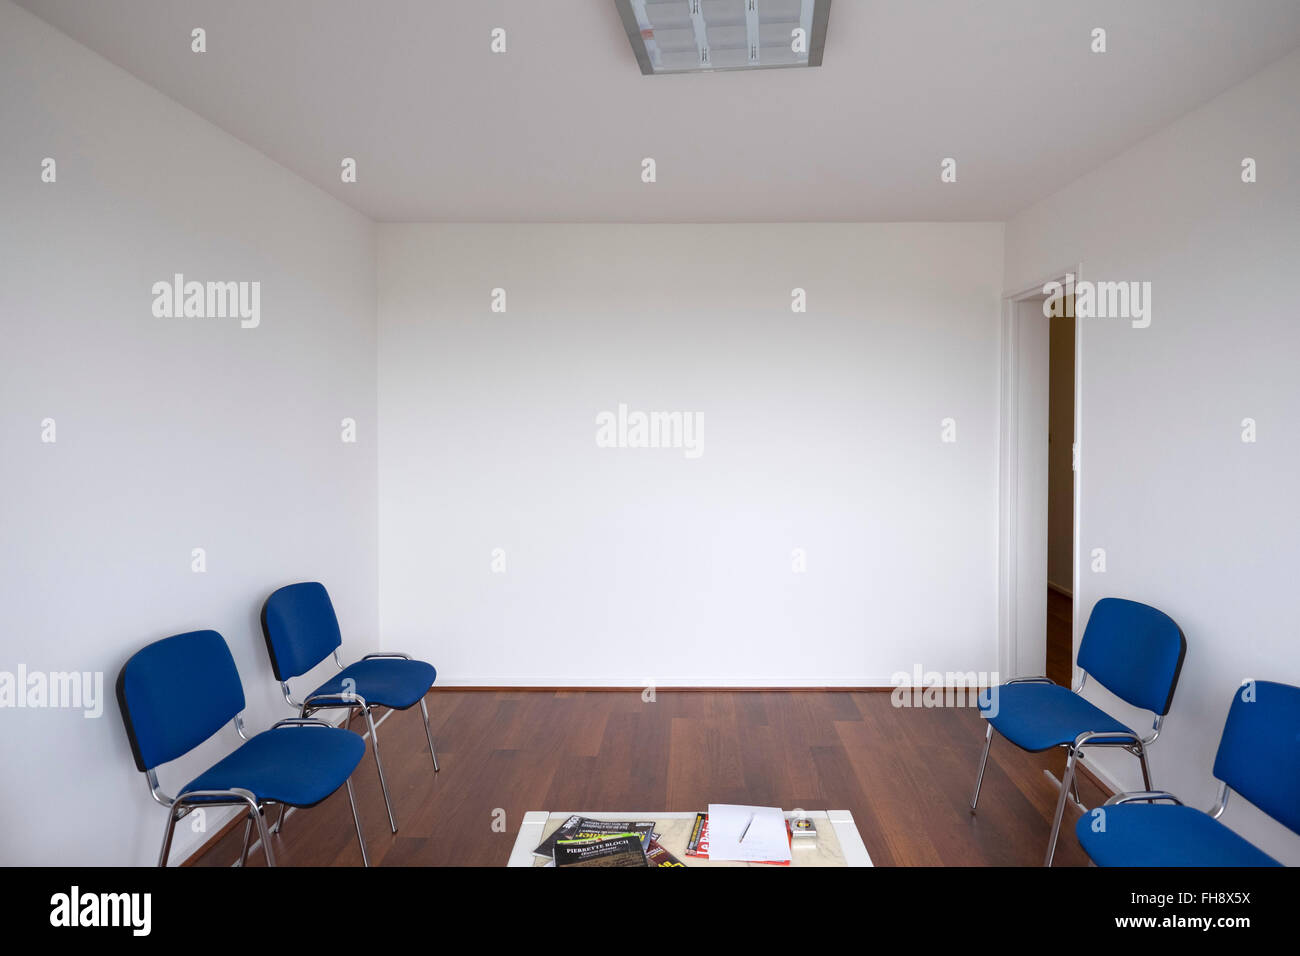 Empty doctor waiting room with white walls and blue chairs Stock Photo